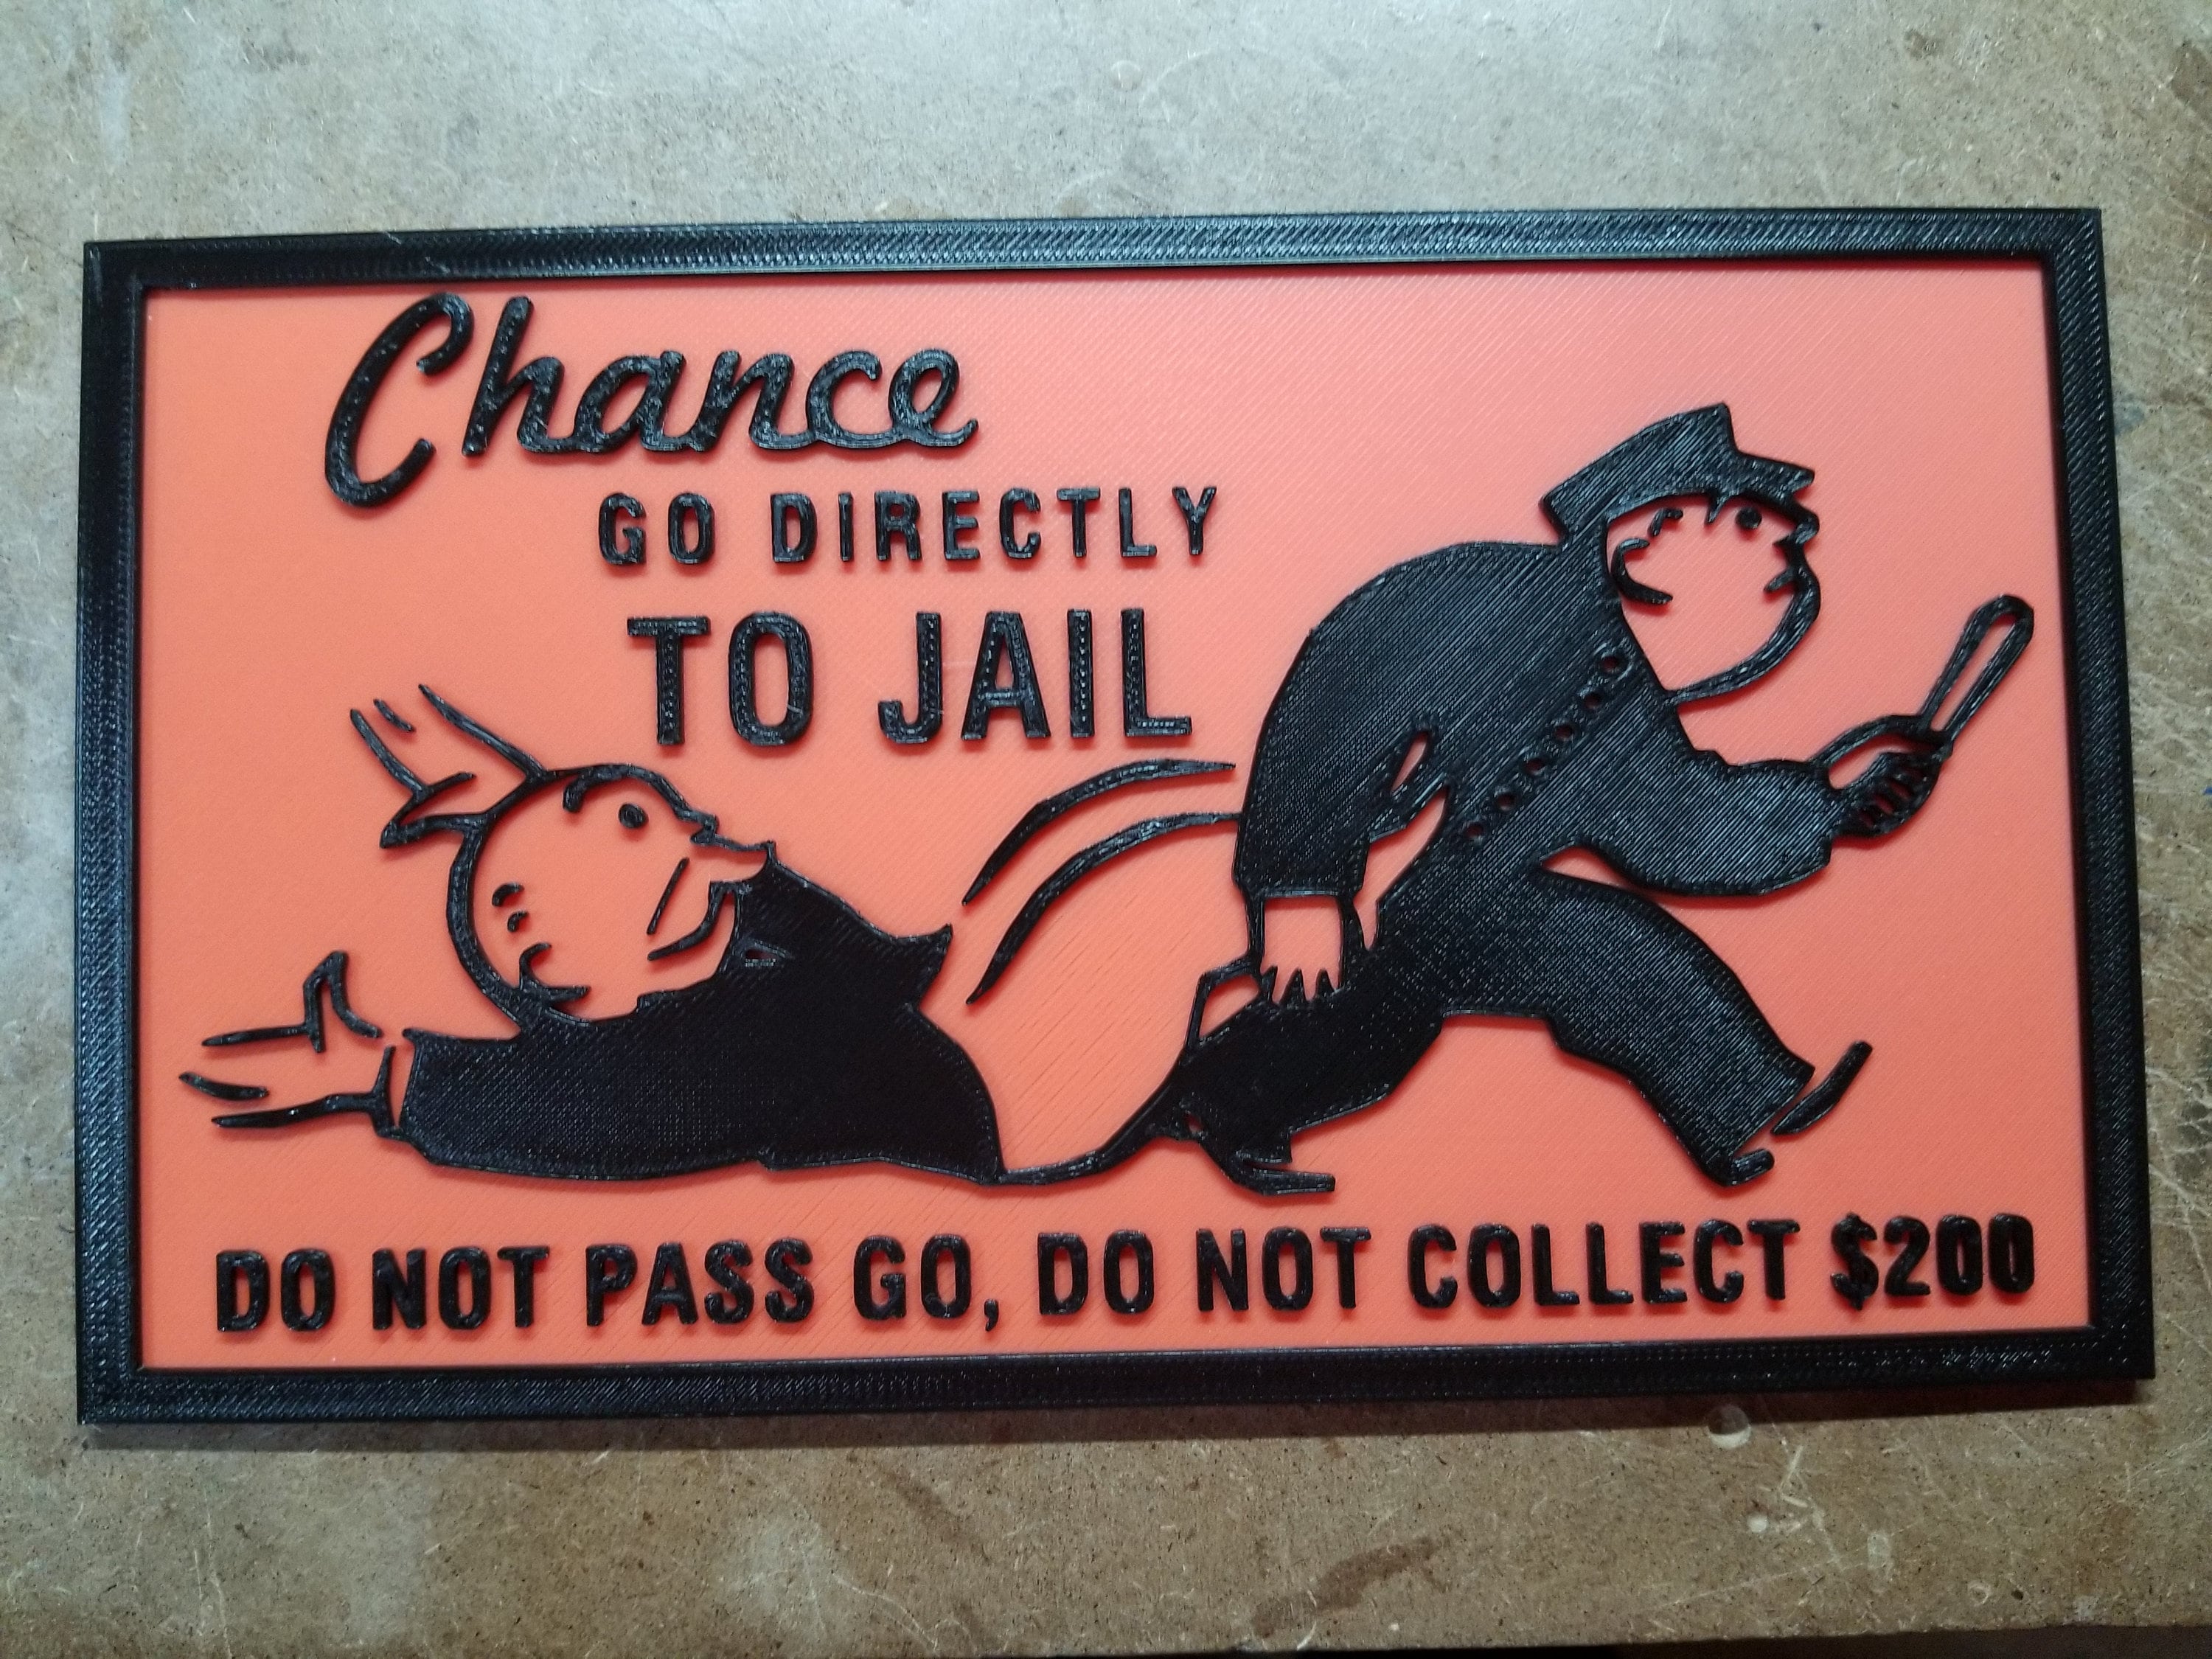 Go Directly to Jail 3d Printed Monopoly Chance Card Wall - Etsy